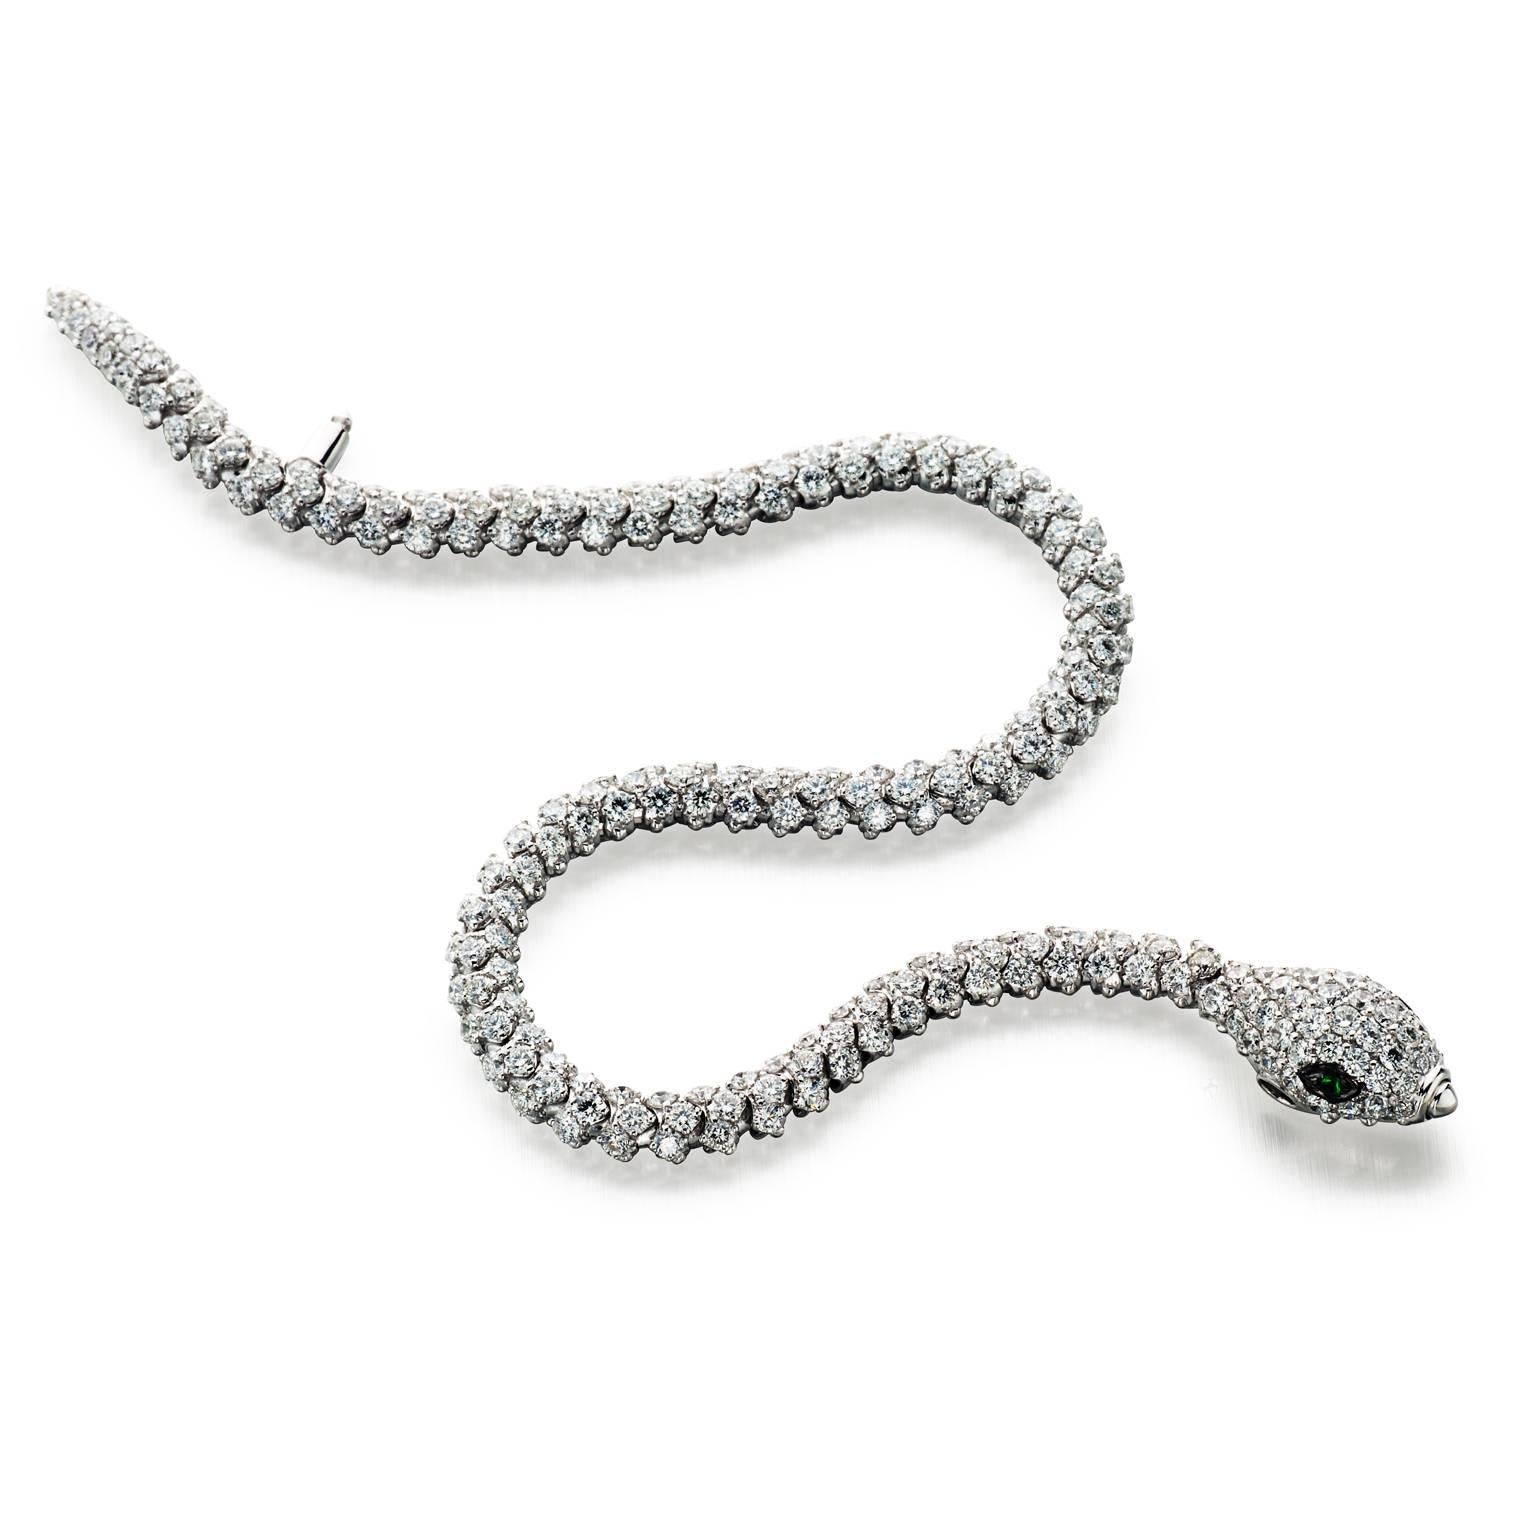 Stunning and exceptionally constructed. This fully articulated 18k white gold snake bracelet features 6.87 cttw diamond scales and polished scutes on underside. The head is detailed with 0.04 cttw green garnet eyes and a push button nose clasp